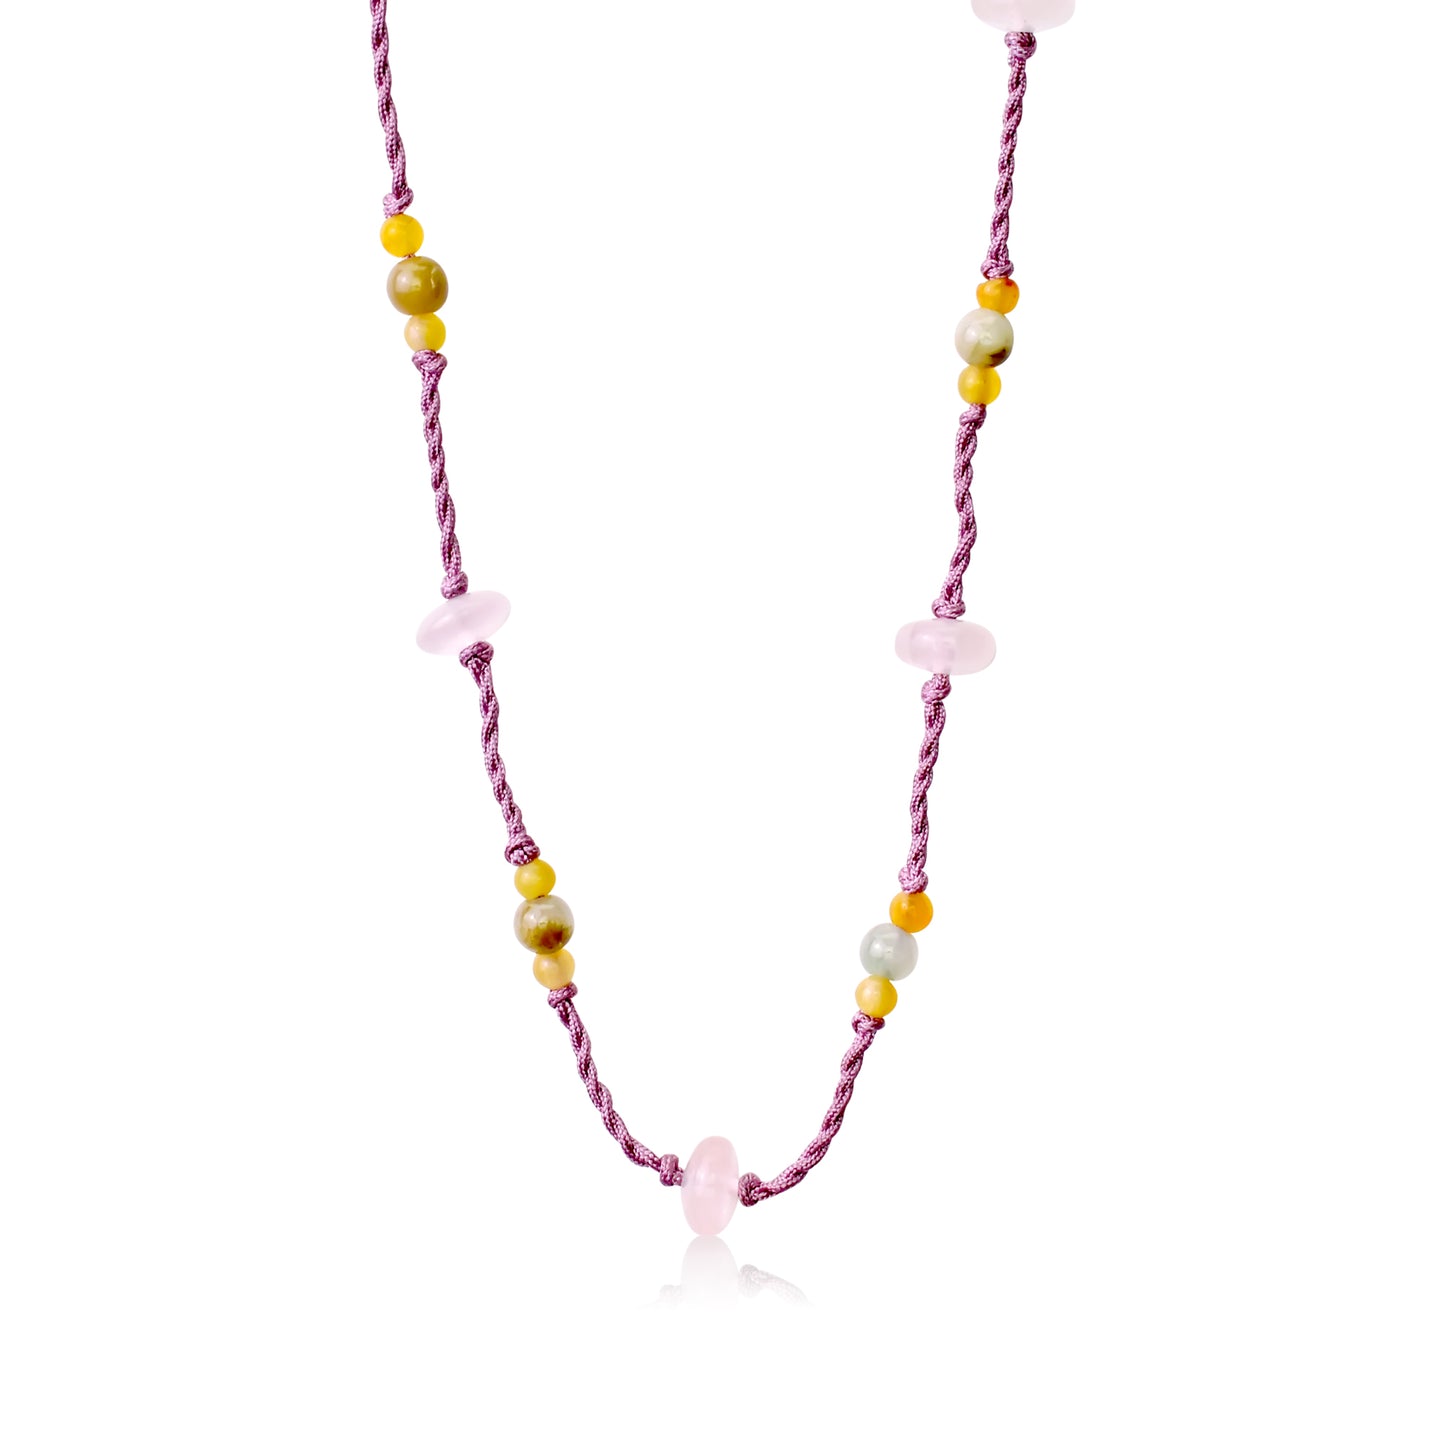 Add Sparkle to Your Look with Rose Quartz Donut-Shape Beads Necklaces